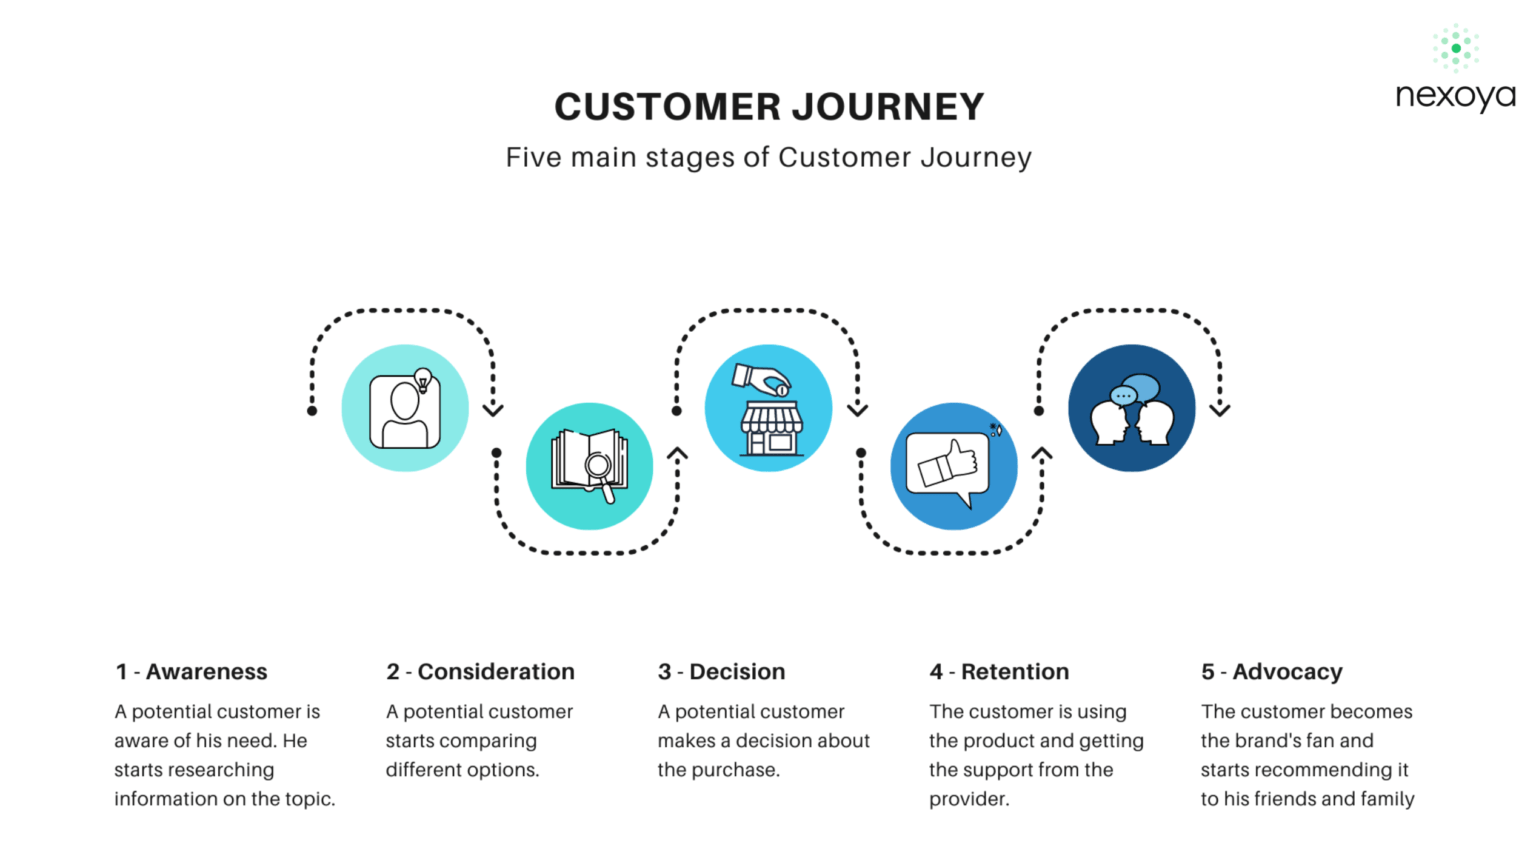 What KPIs do you need to track in the customer journey?